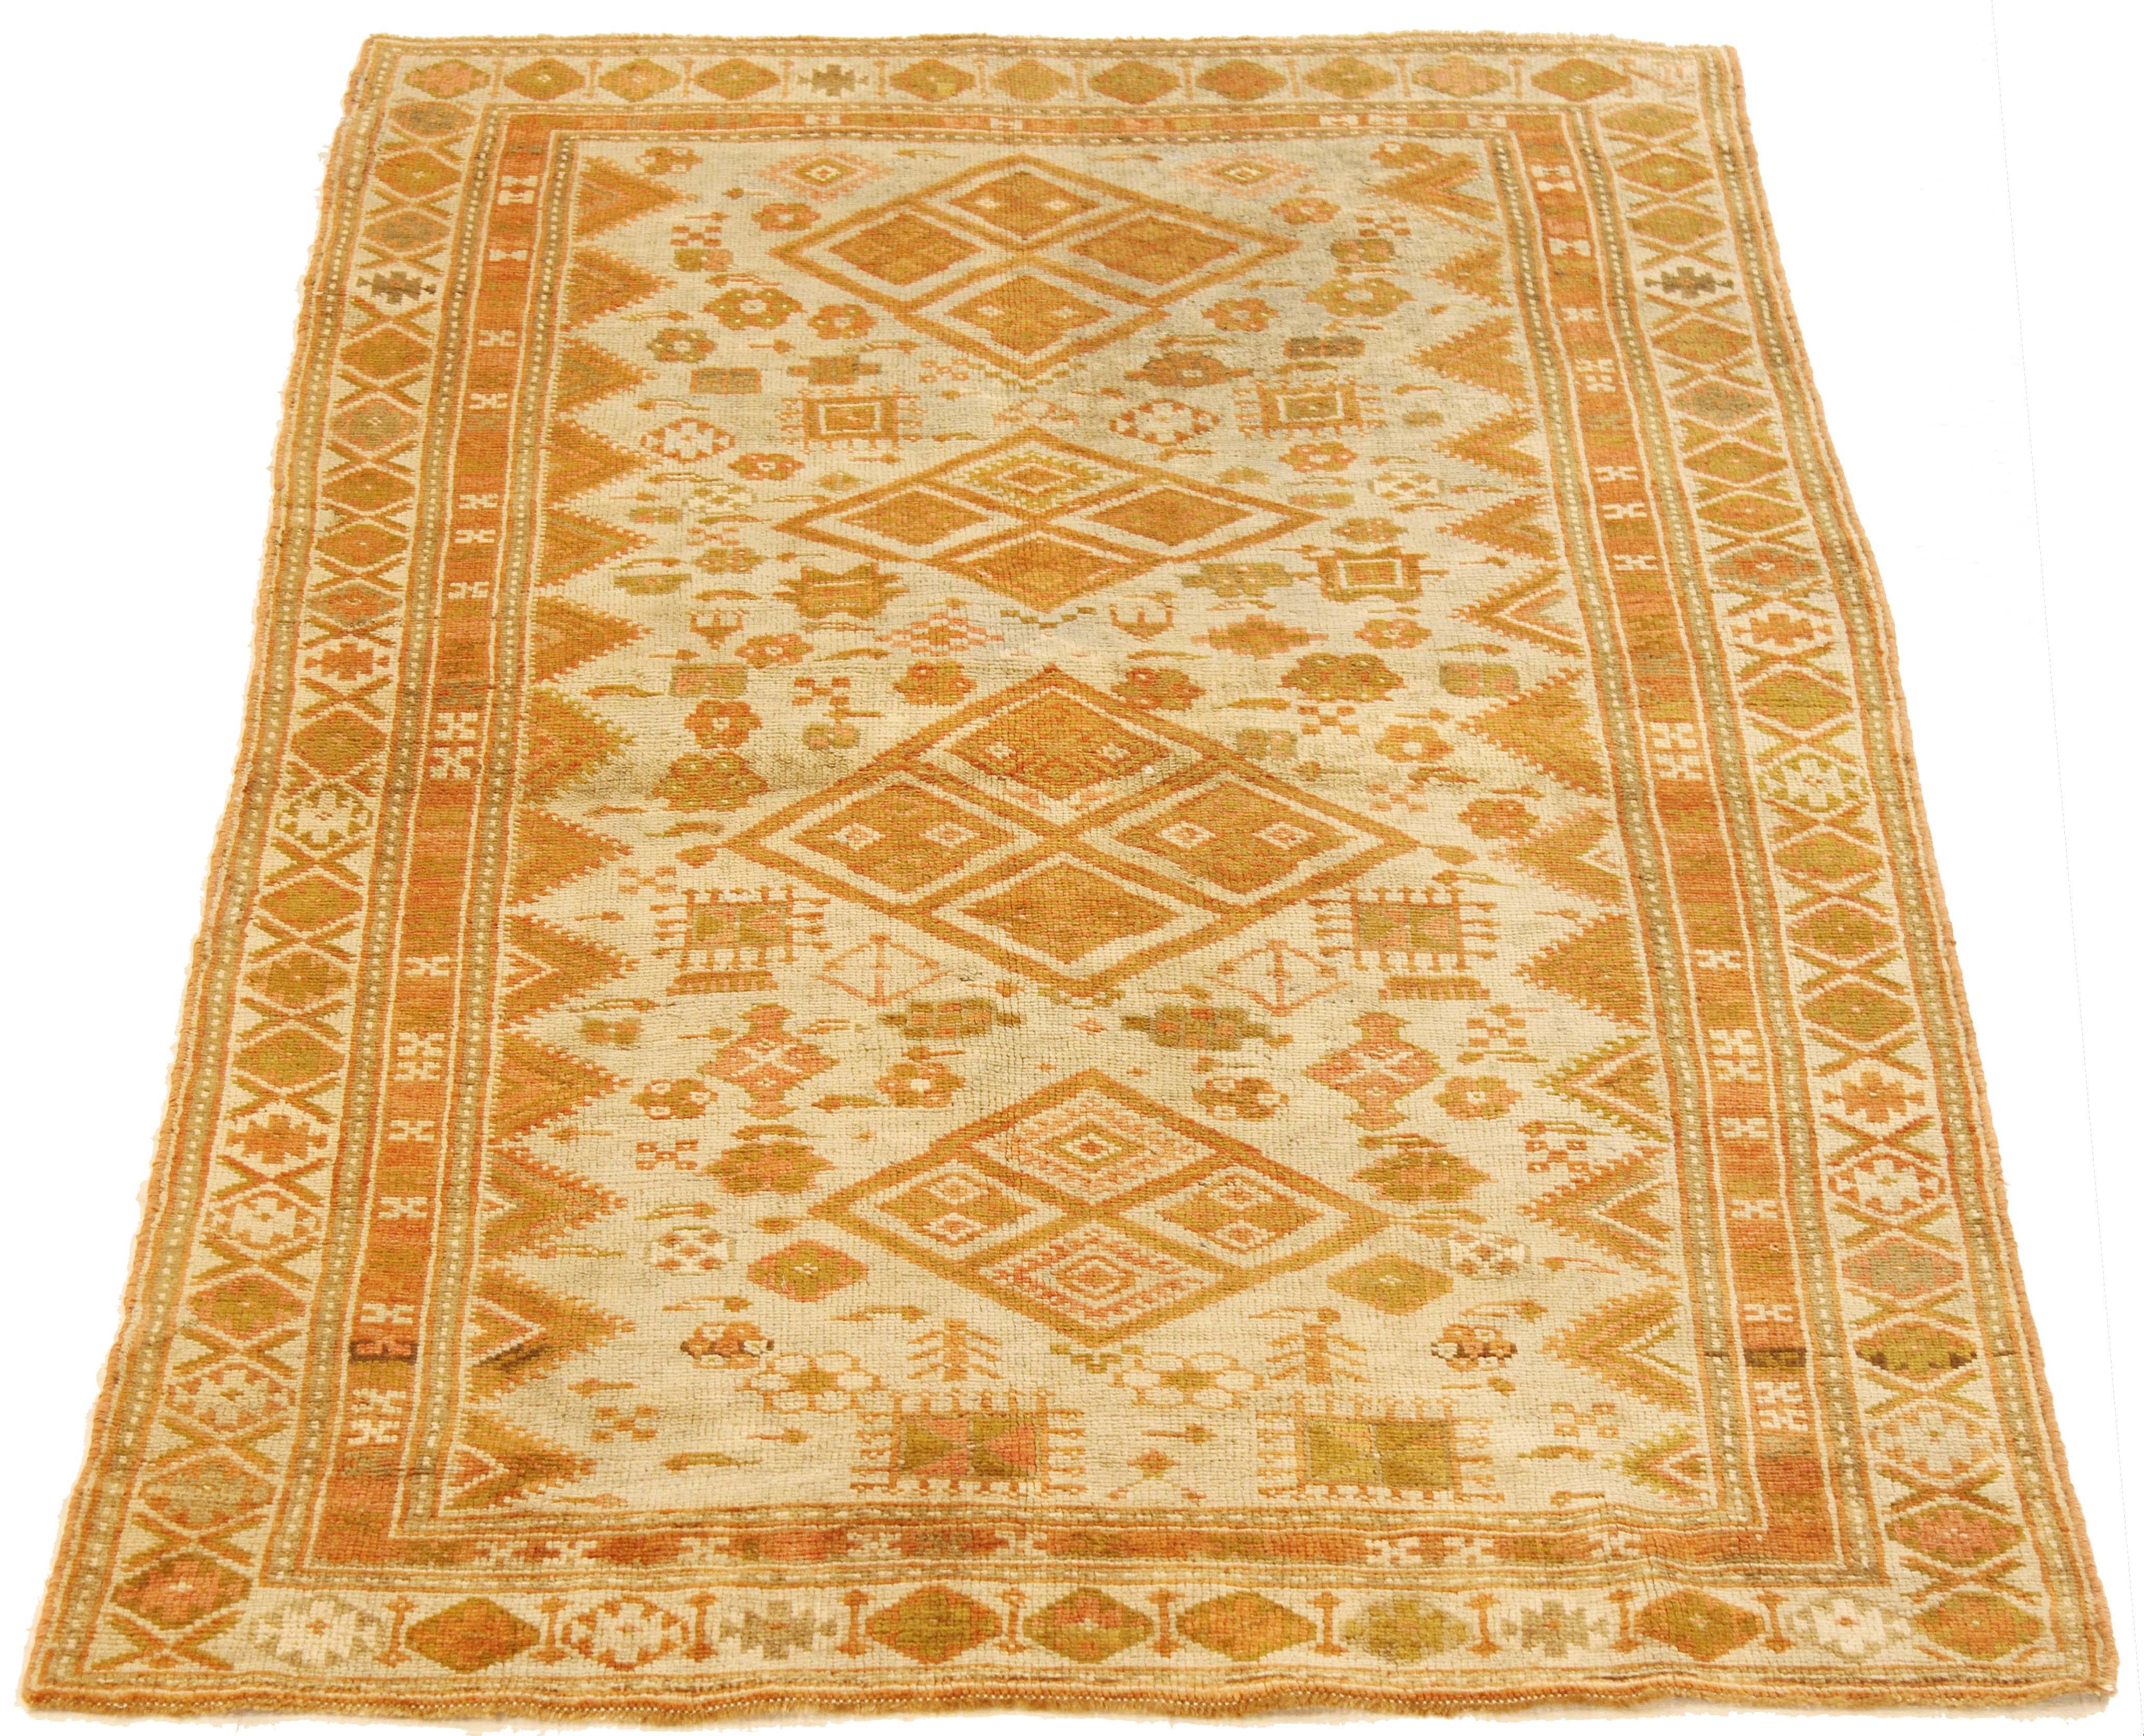 Antique Persian rug handwoven from the finest sheep’s wool and colored with all-natural vegetable dyes that are safe for humans and pets. It’s a traditional Bijar design featuring medallions in green and orange over the ivory center field. These